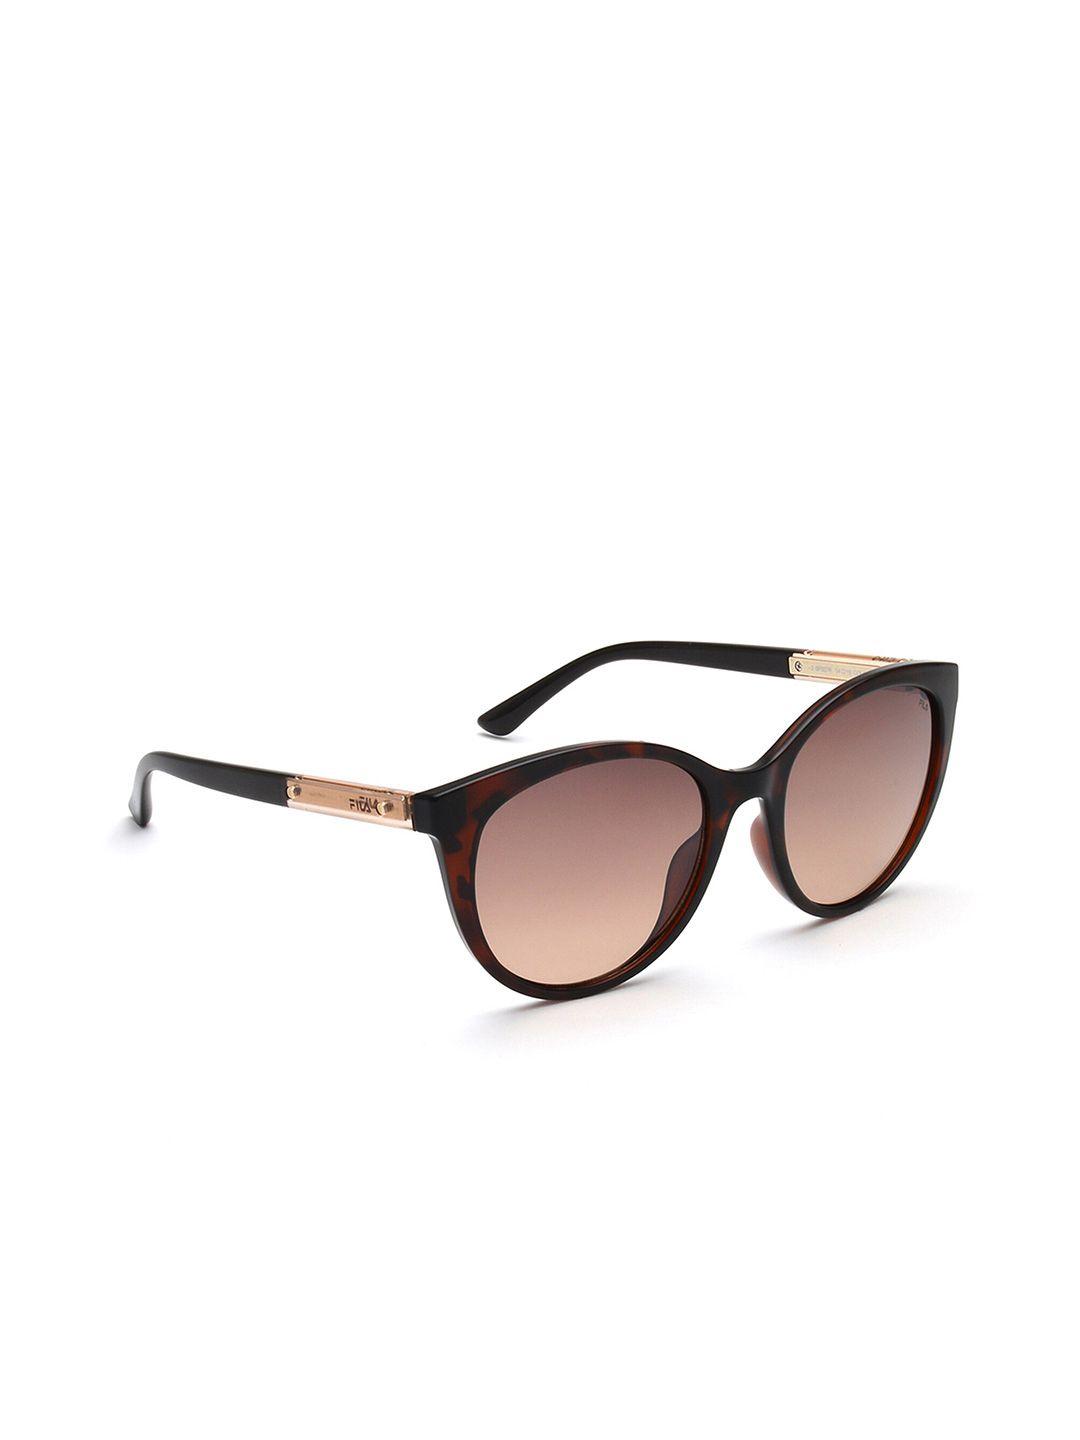 fila women oval sunglasses with uv protected lens